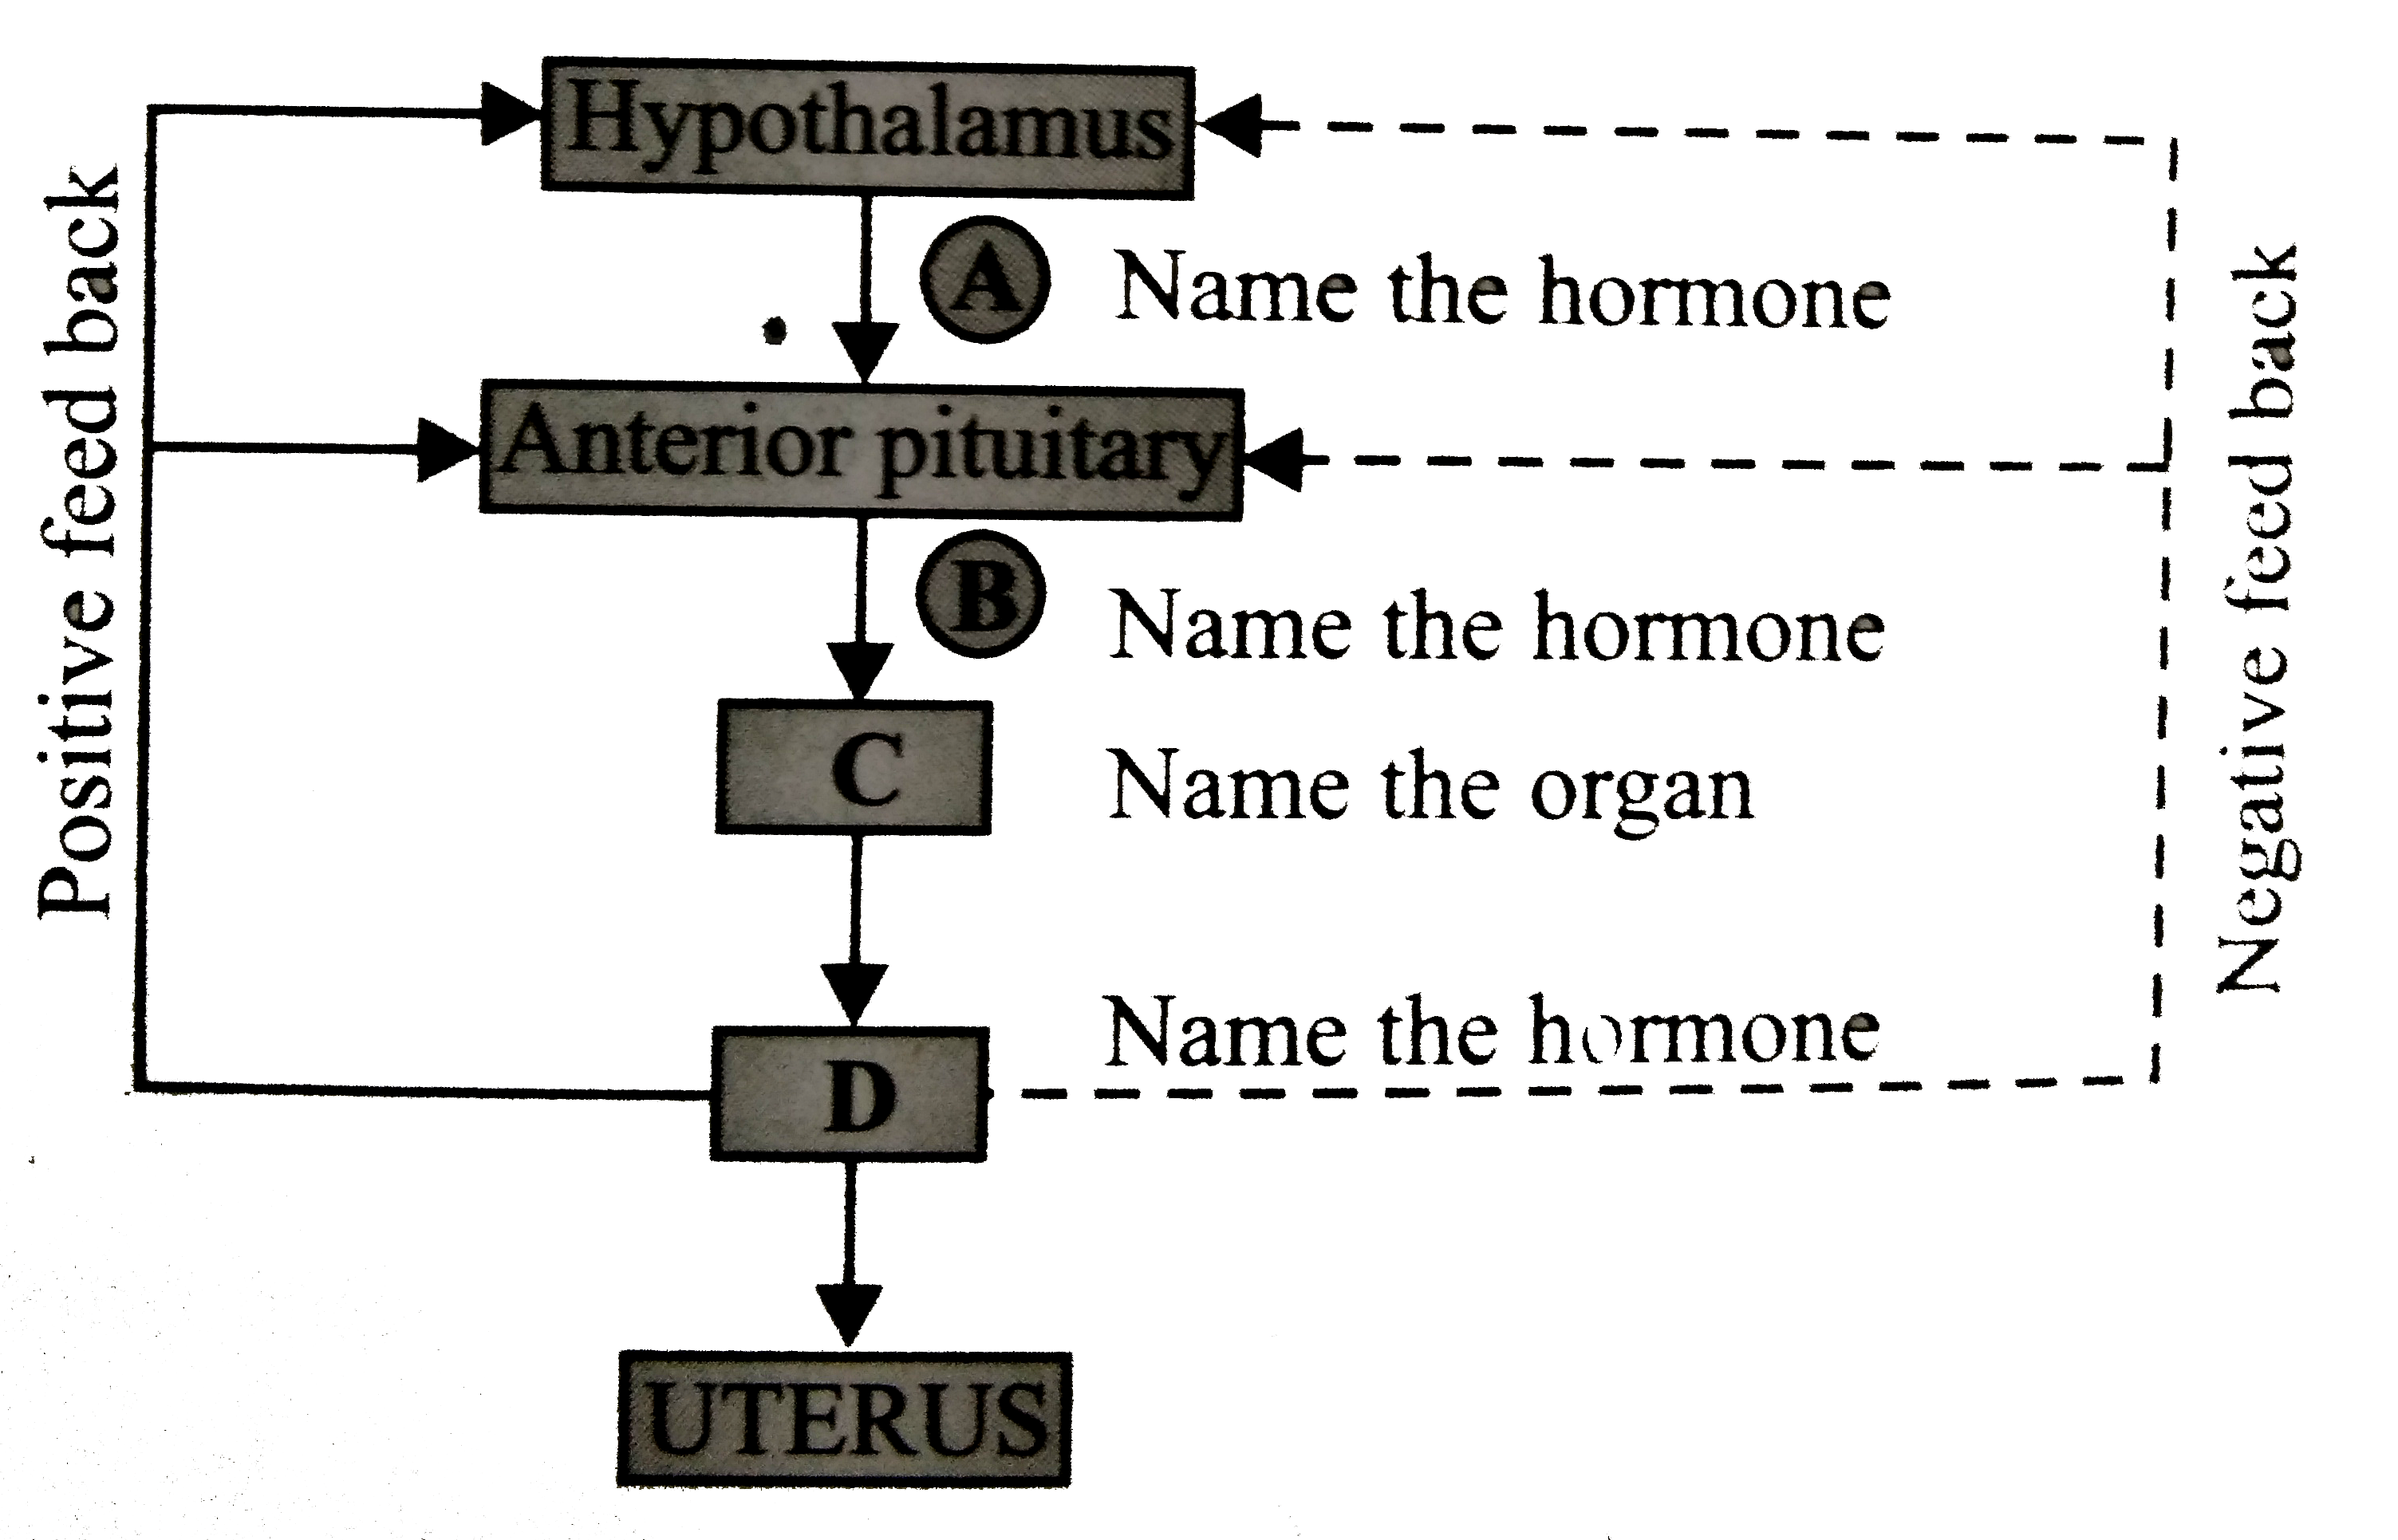 Given below is an incomplete flow chart showing influence of hormones on  gametogensis in females. Study it carefully and identify A, B, C and D.